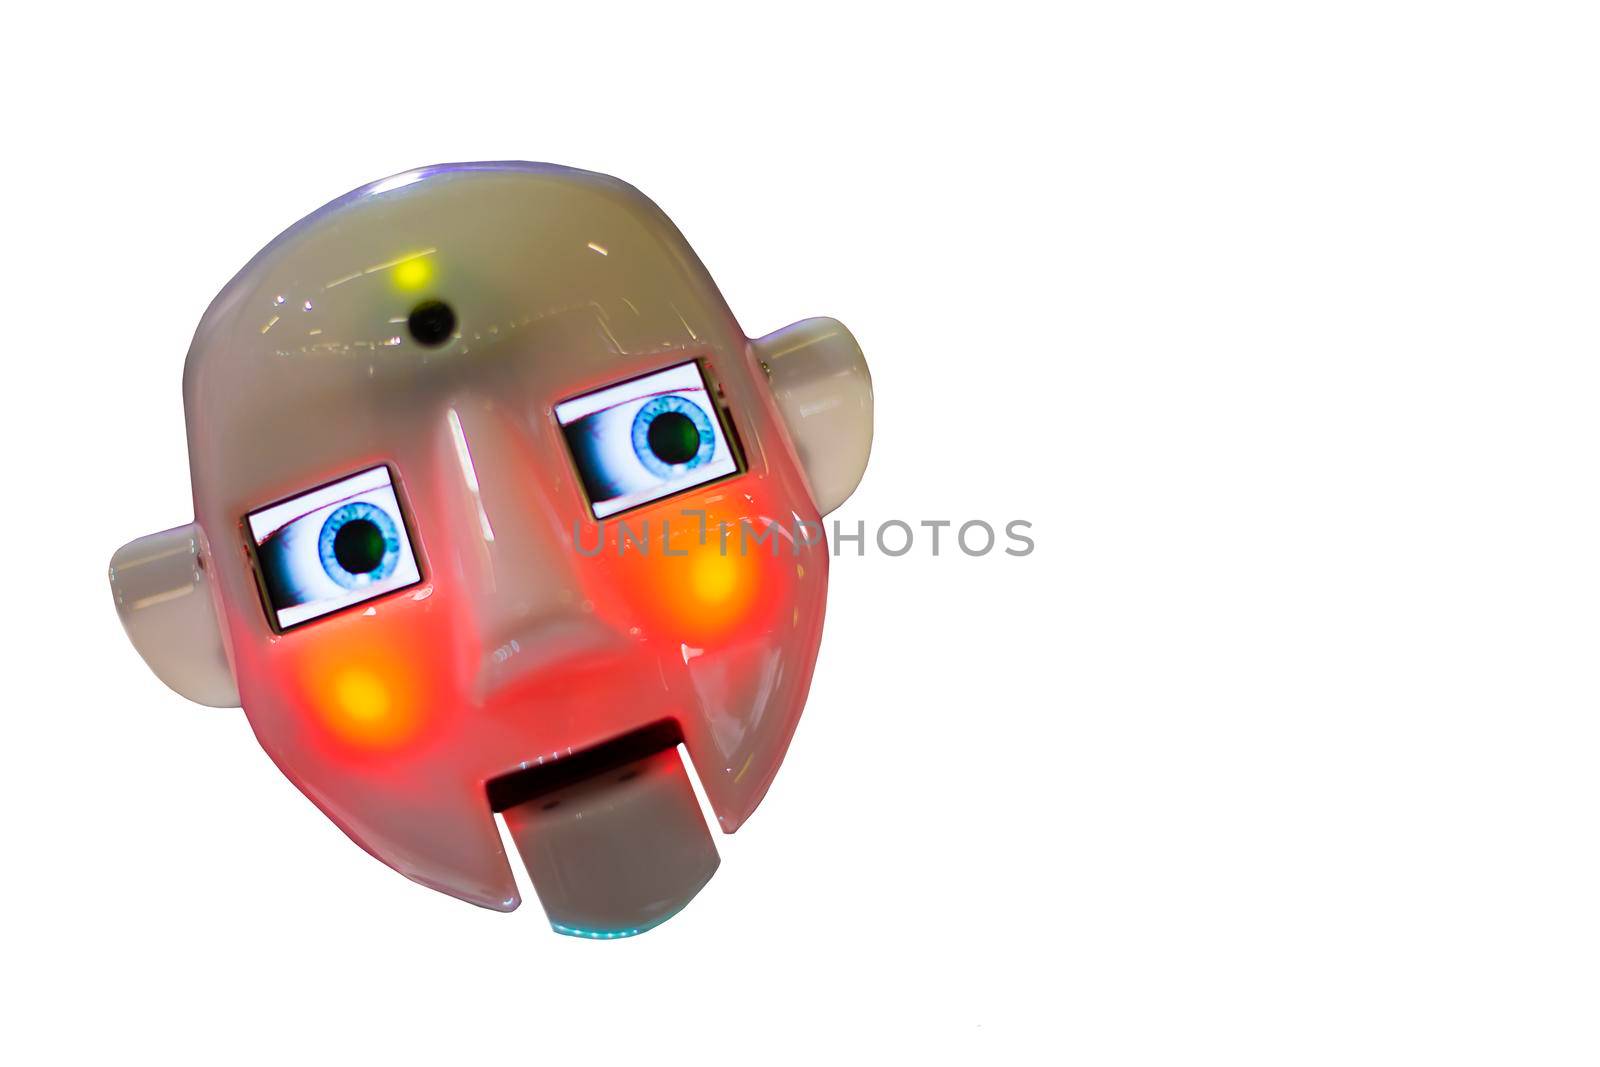 Funny robot face on a white background.